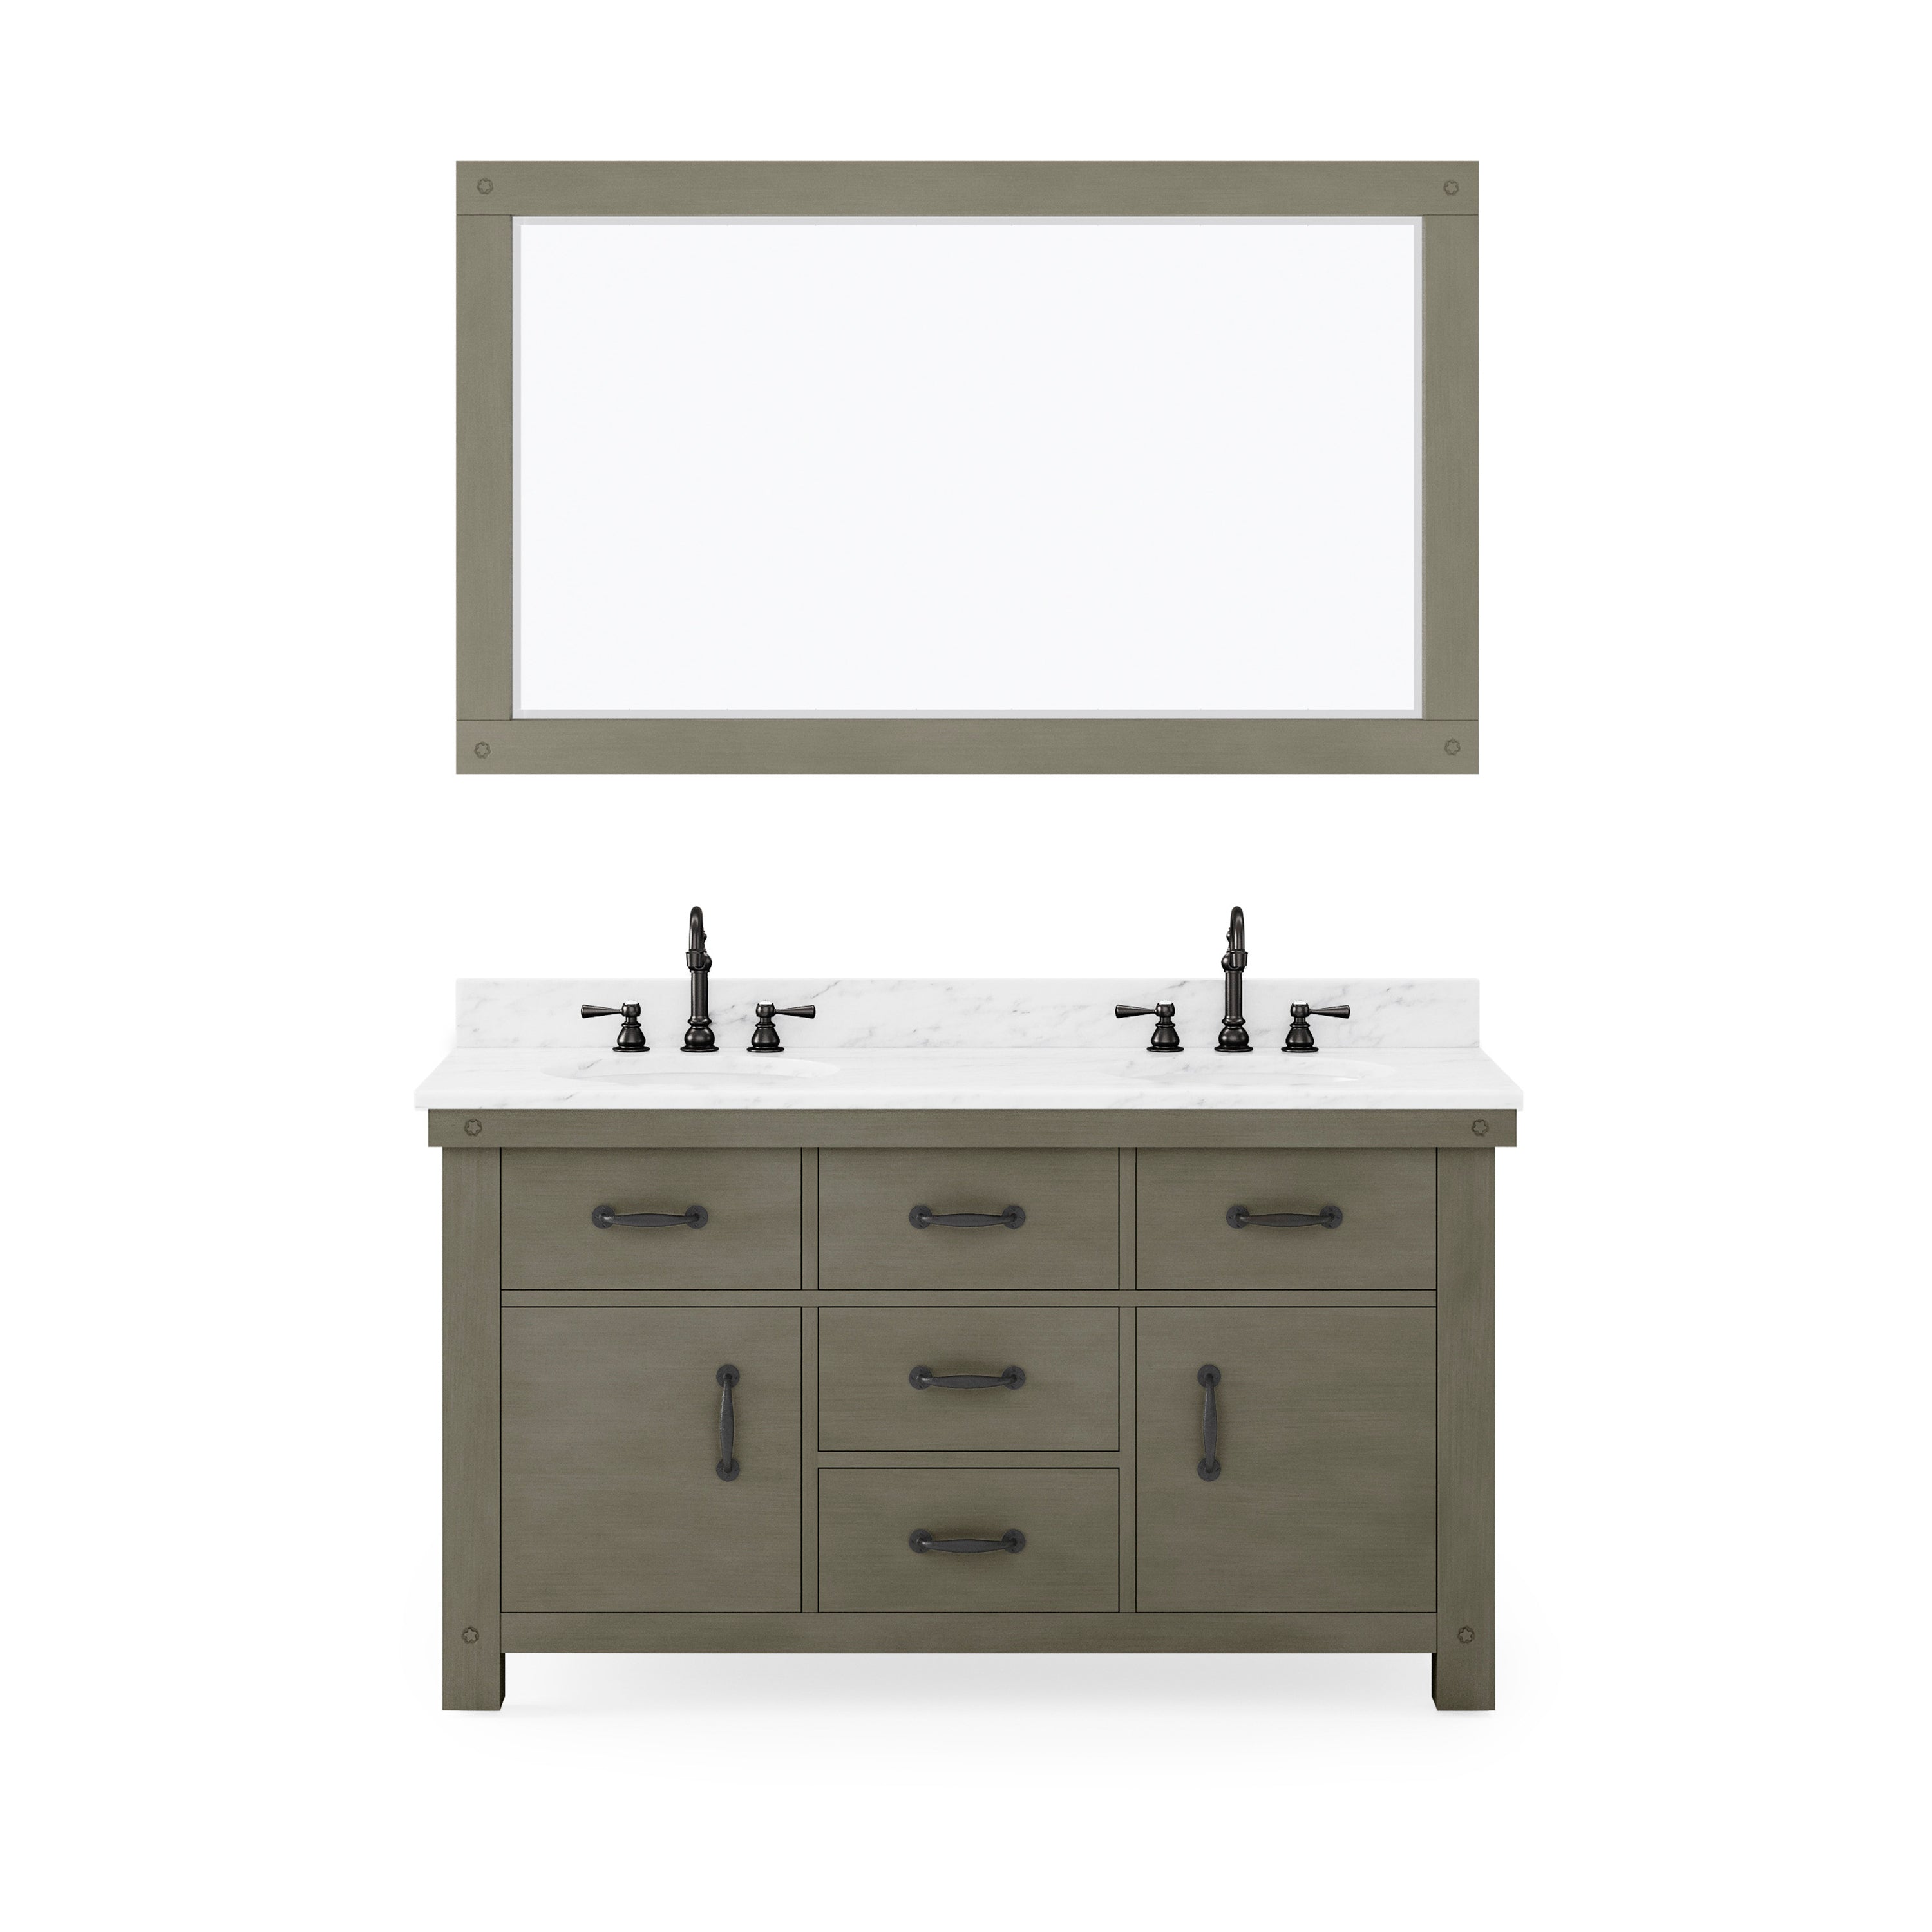 Water Creation | 60 Inch Grizzle Grey Double Sink Bathroom Vanity With Mirror And Faucets With Carrara White Marble Counter Top From The ABERDEEN Collection | AB60CW03GG-A60BX1203